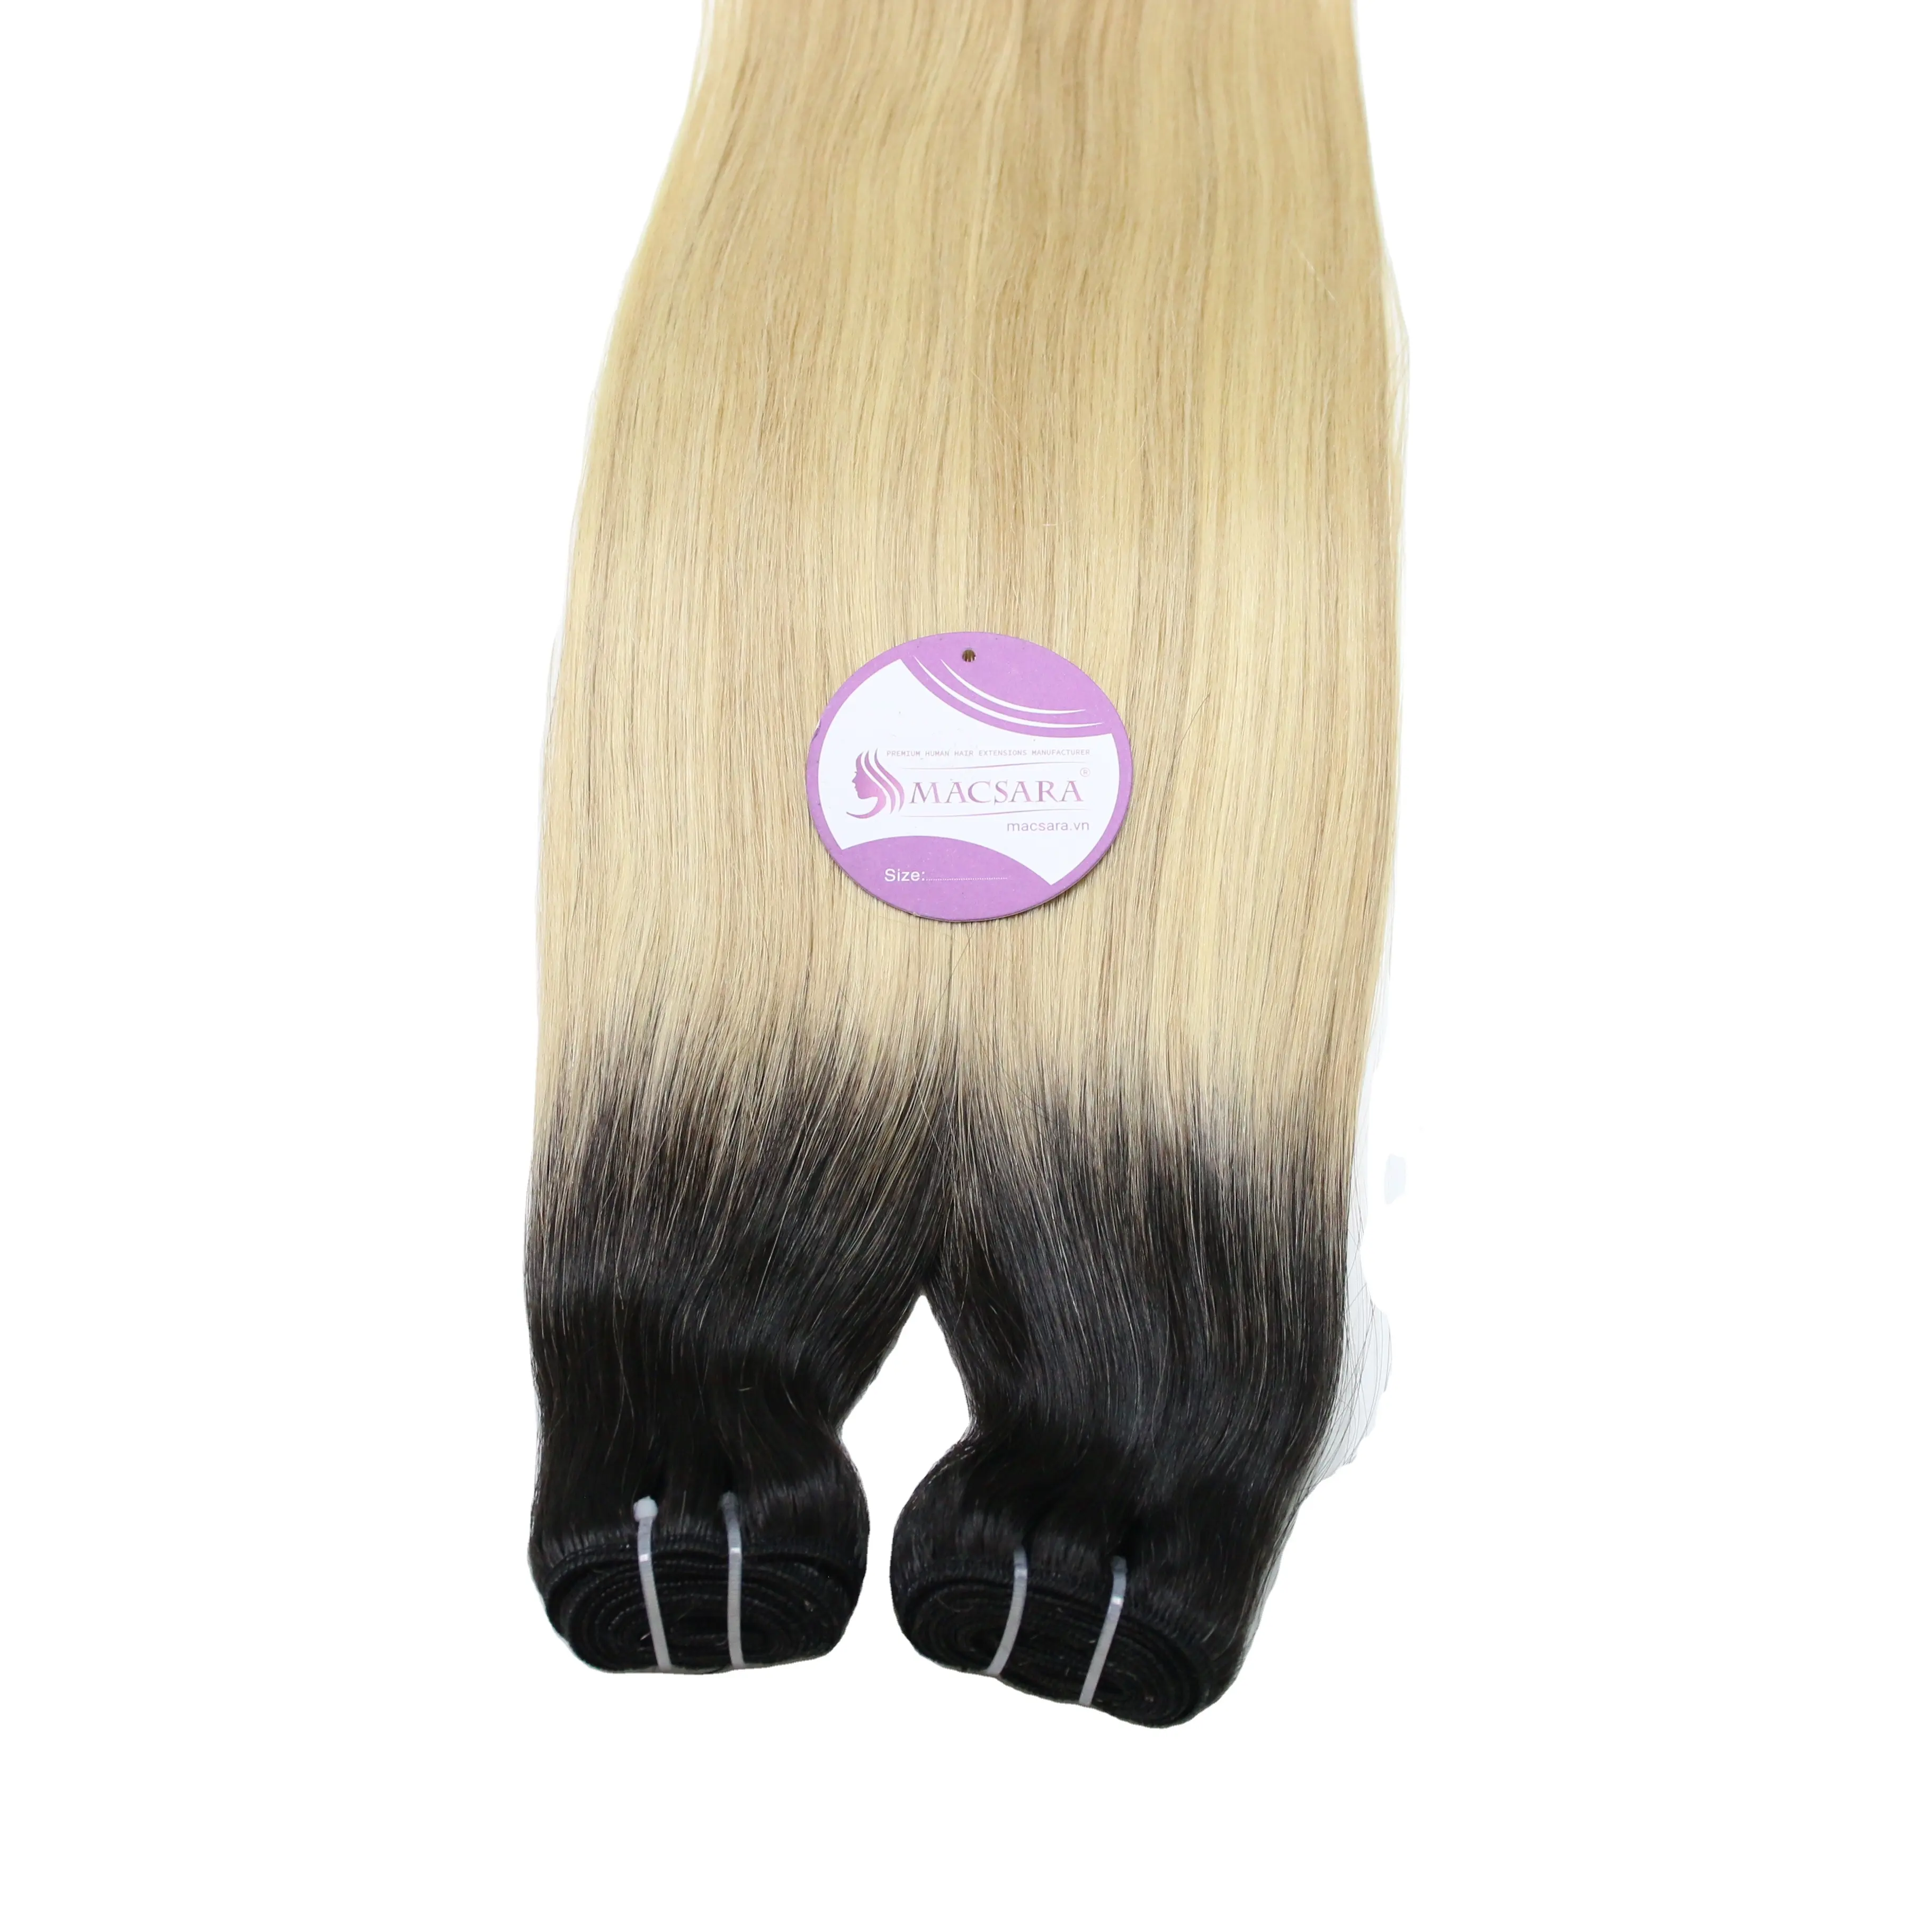 Remy Machine Weaving New Arrival Lasting For More Than 12 Months Double Drawn Cuticle Aligned Hair Extensions